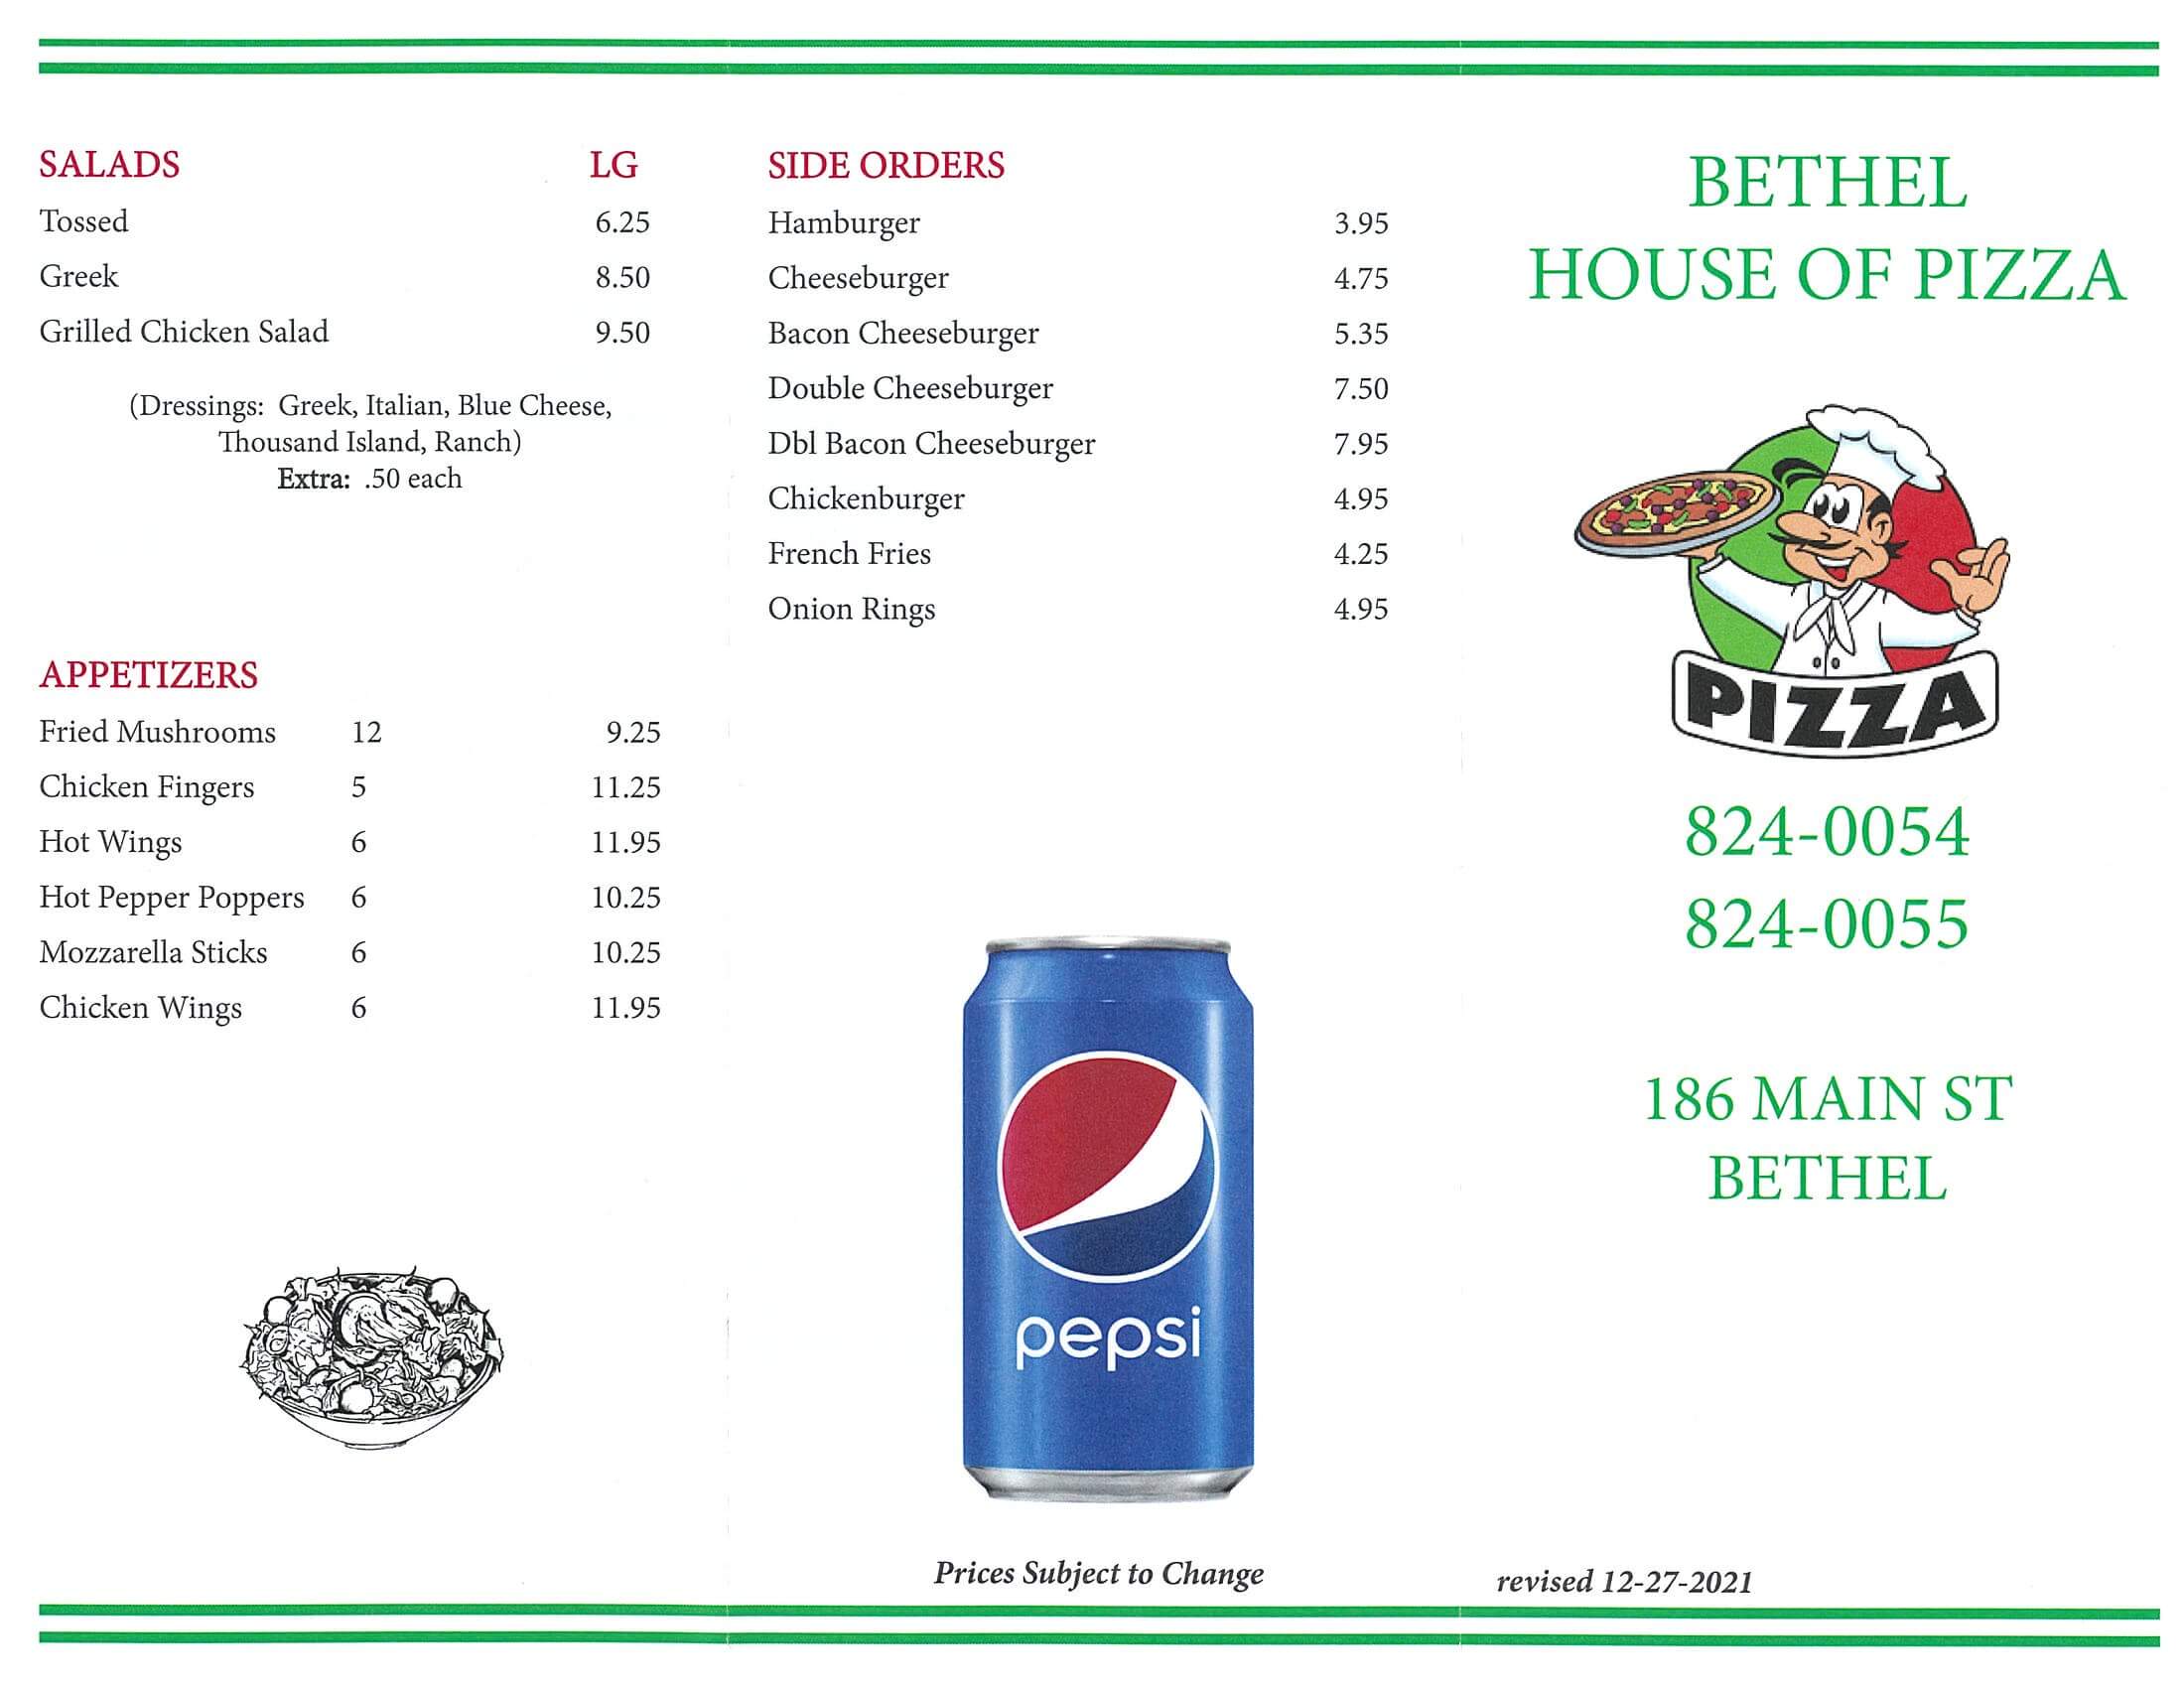 Bethel House of Pizza menu page 1